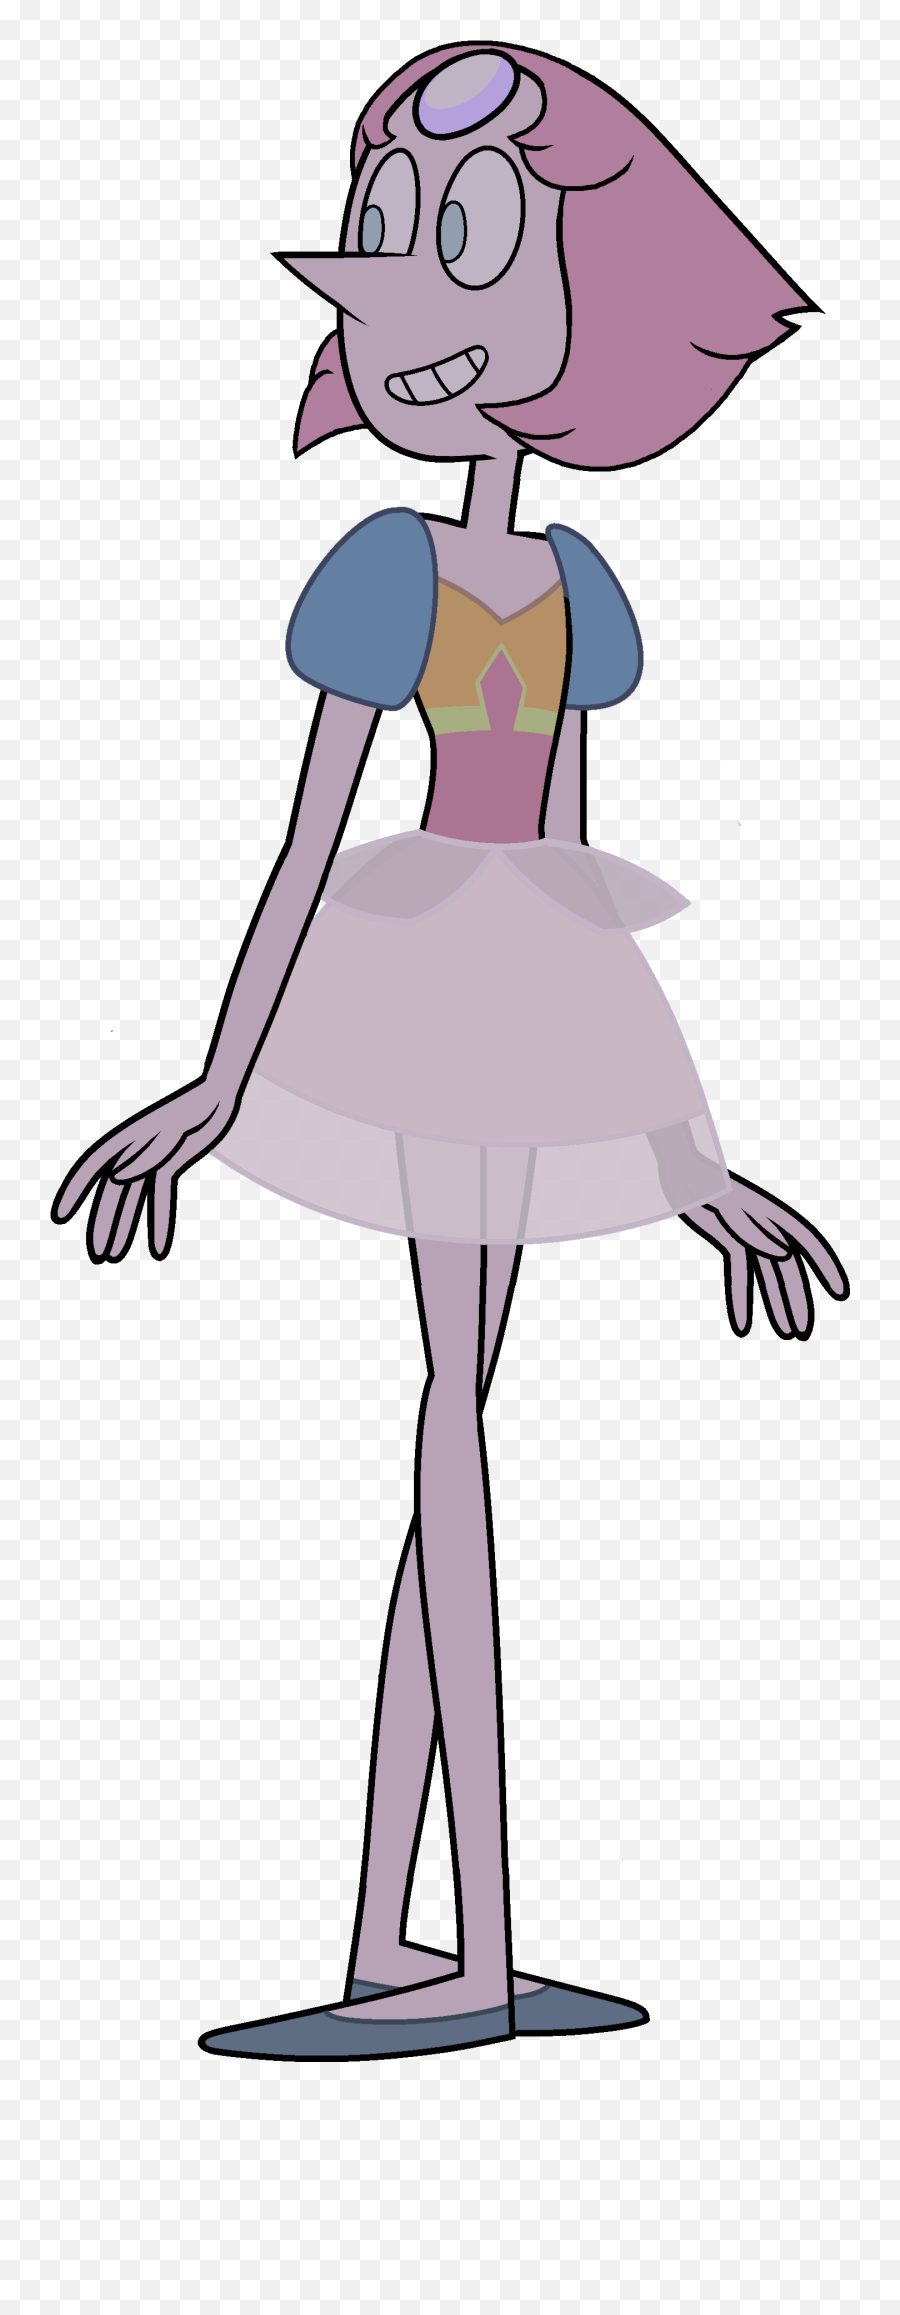 Outfit Png - Oflubntlorg Pearl A Single Pale Rose Outfit,Bulma Png